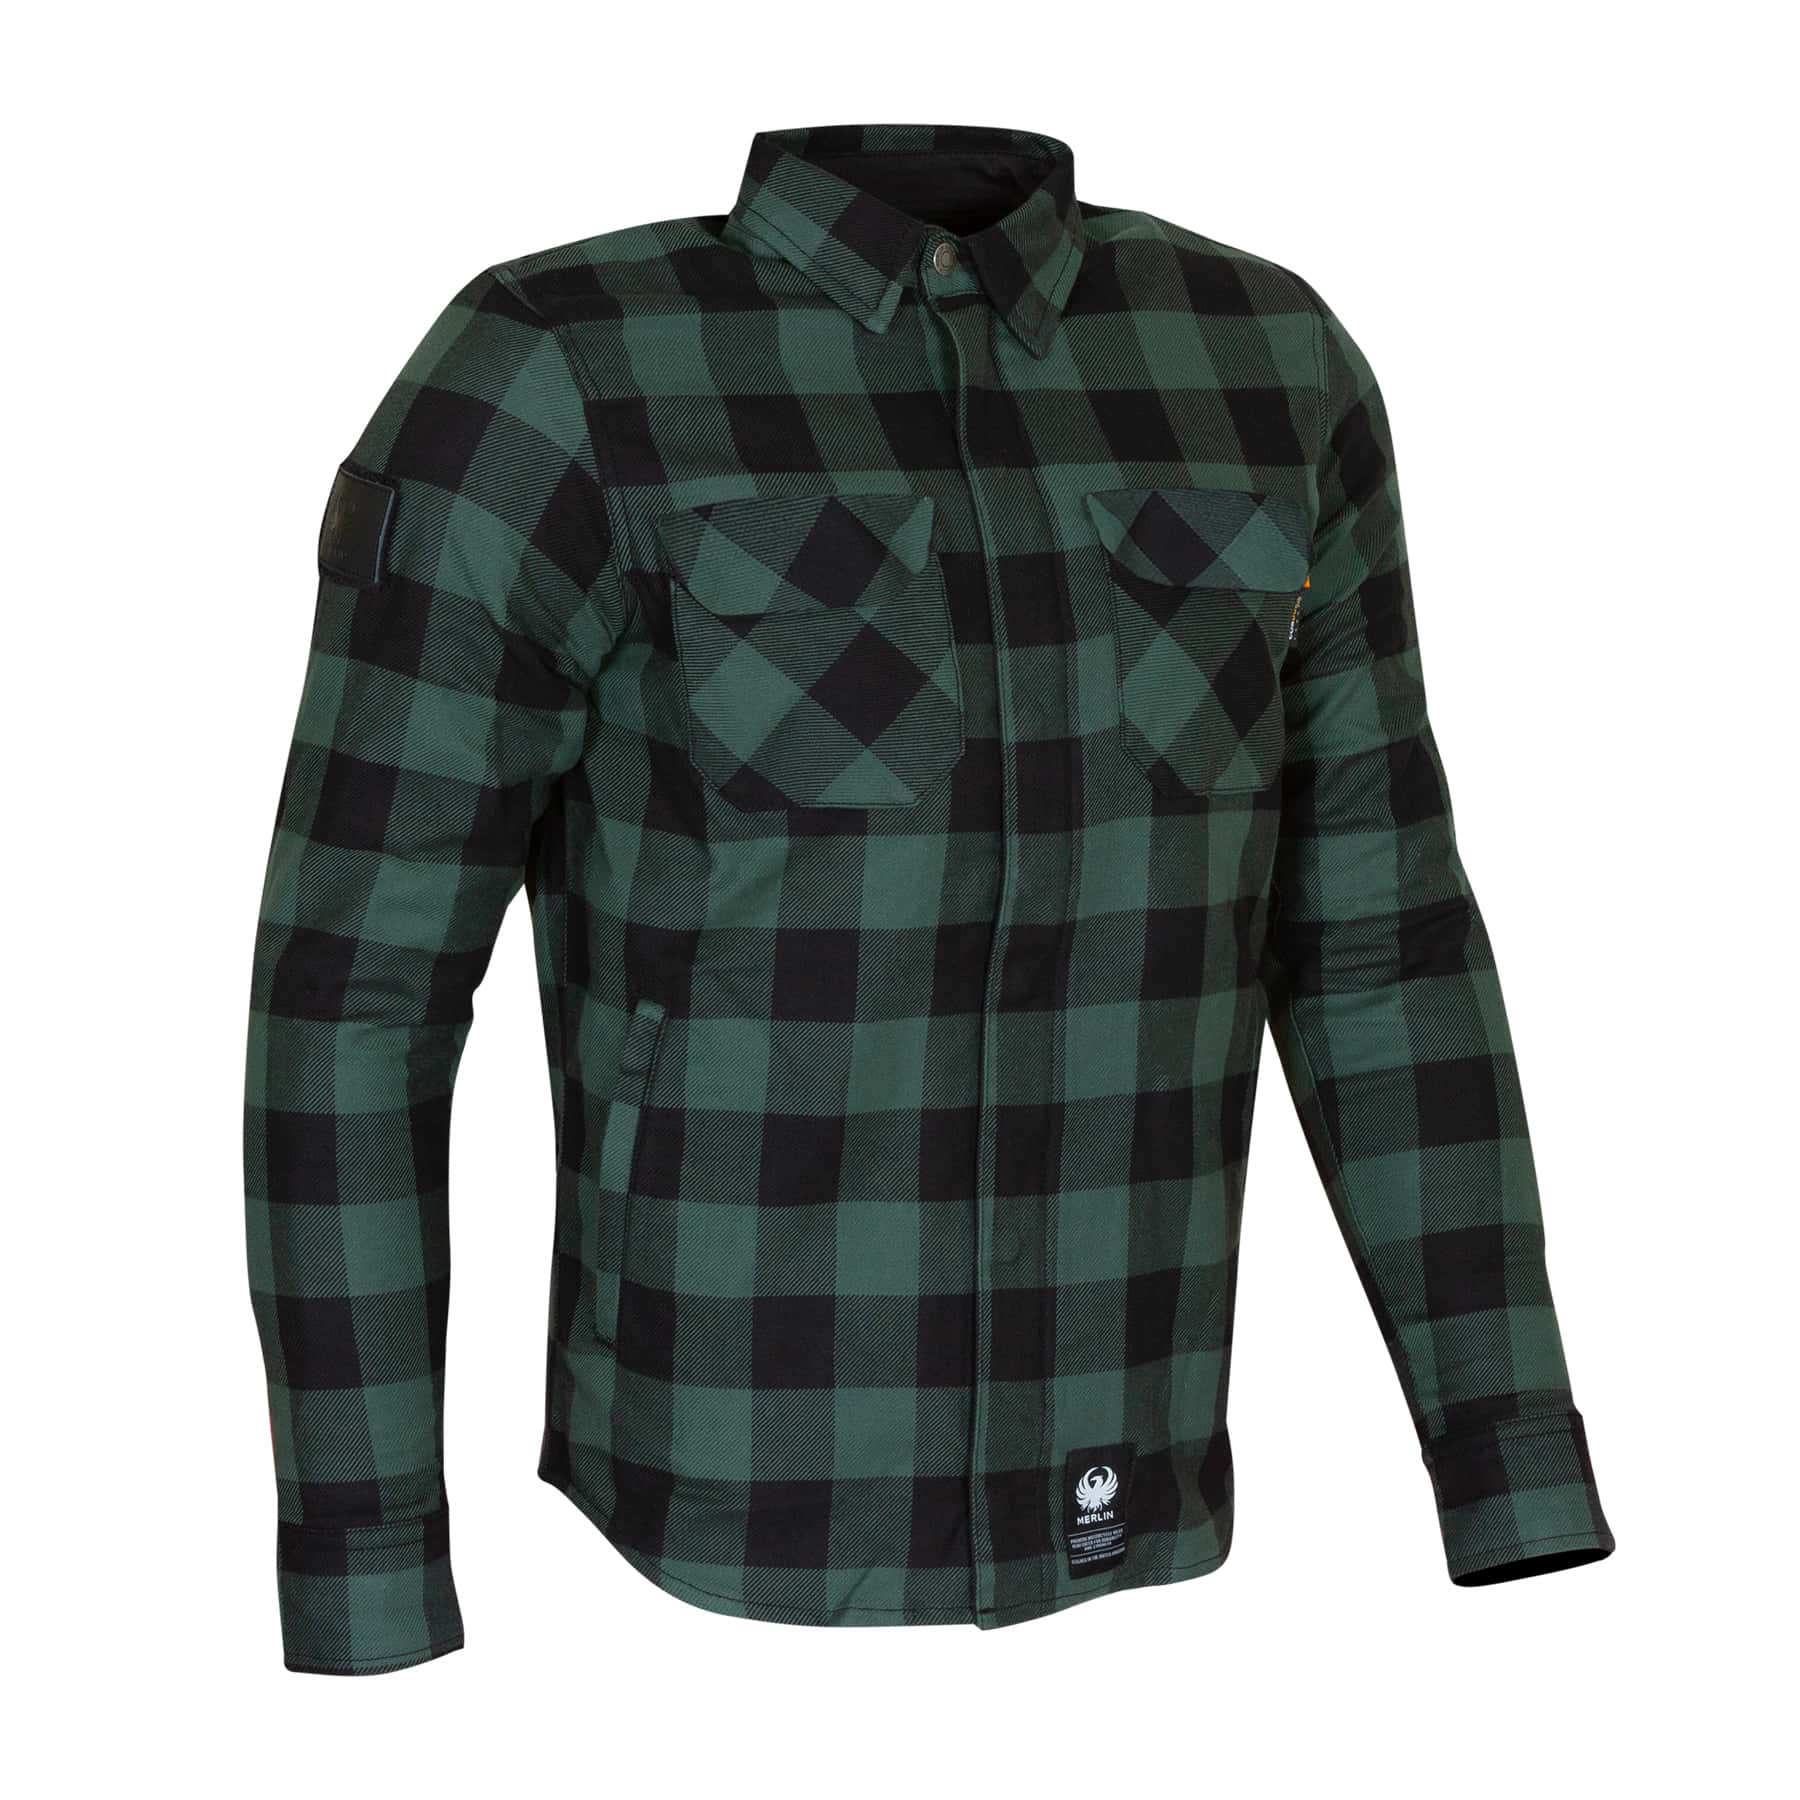 Merlin Sherbrook Riding Shirt in green and black checkered pattern